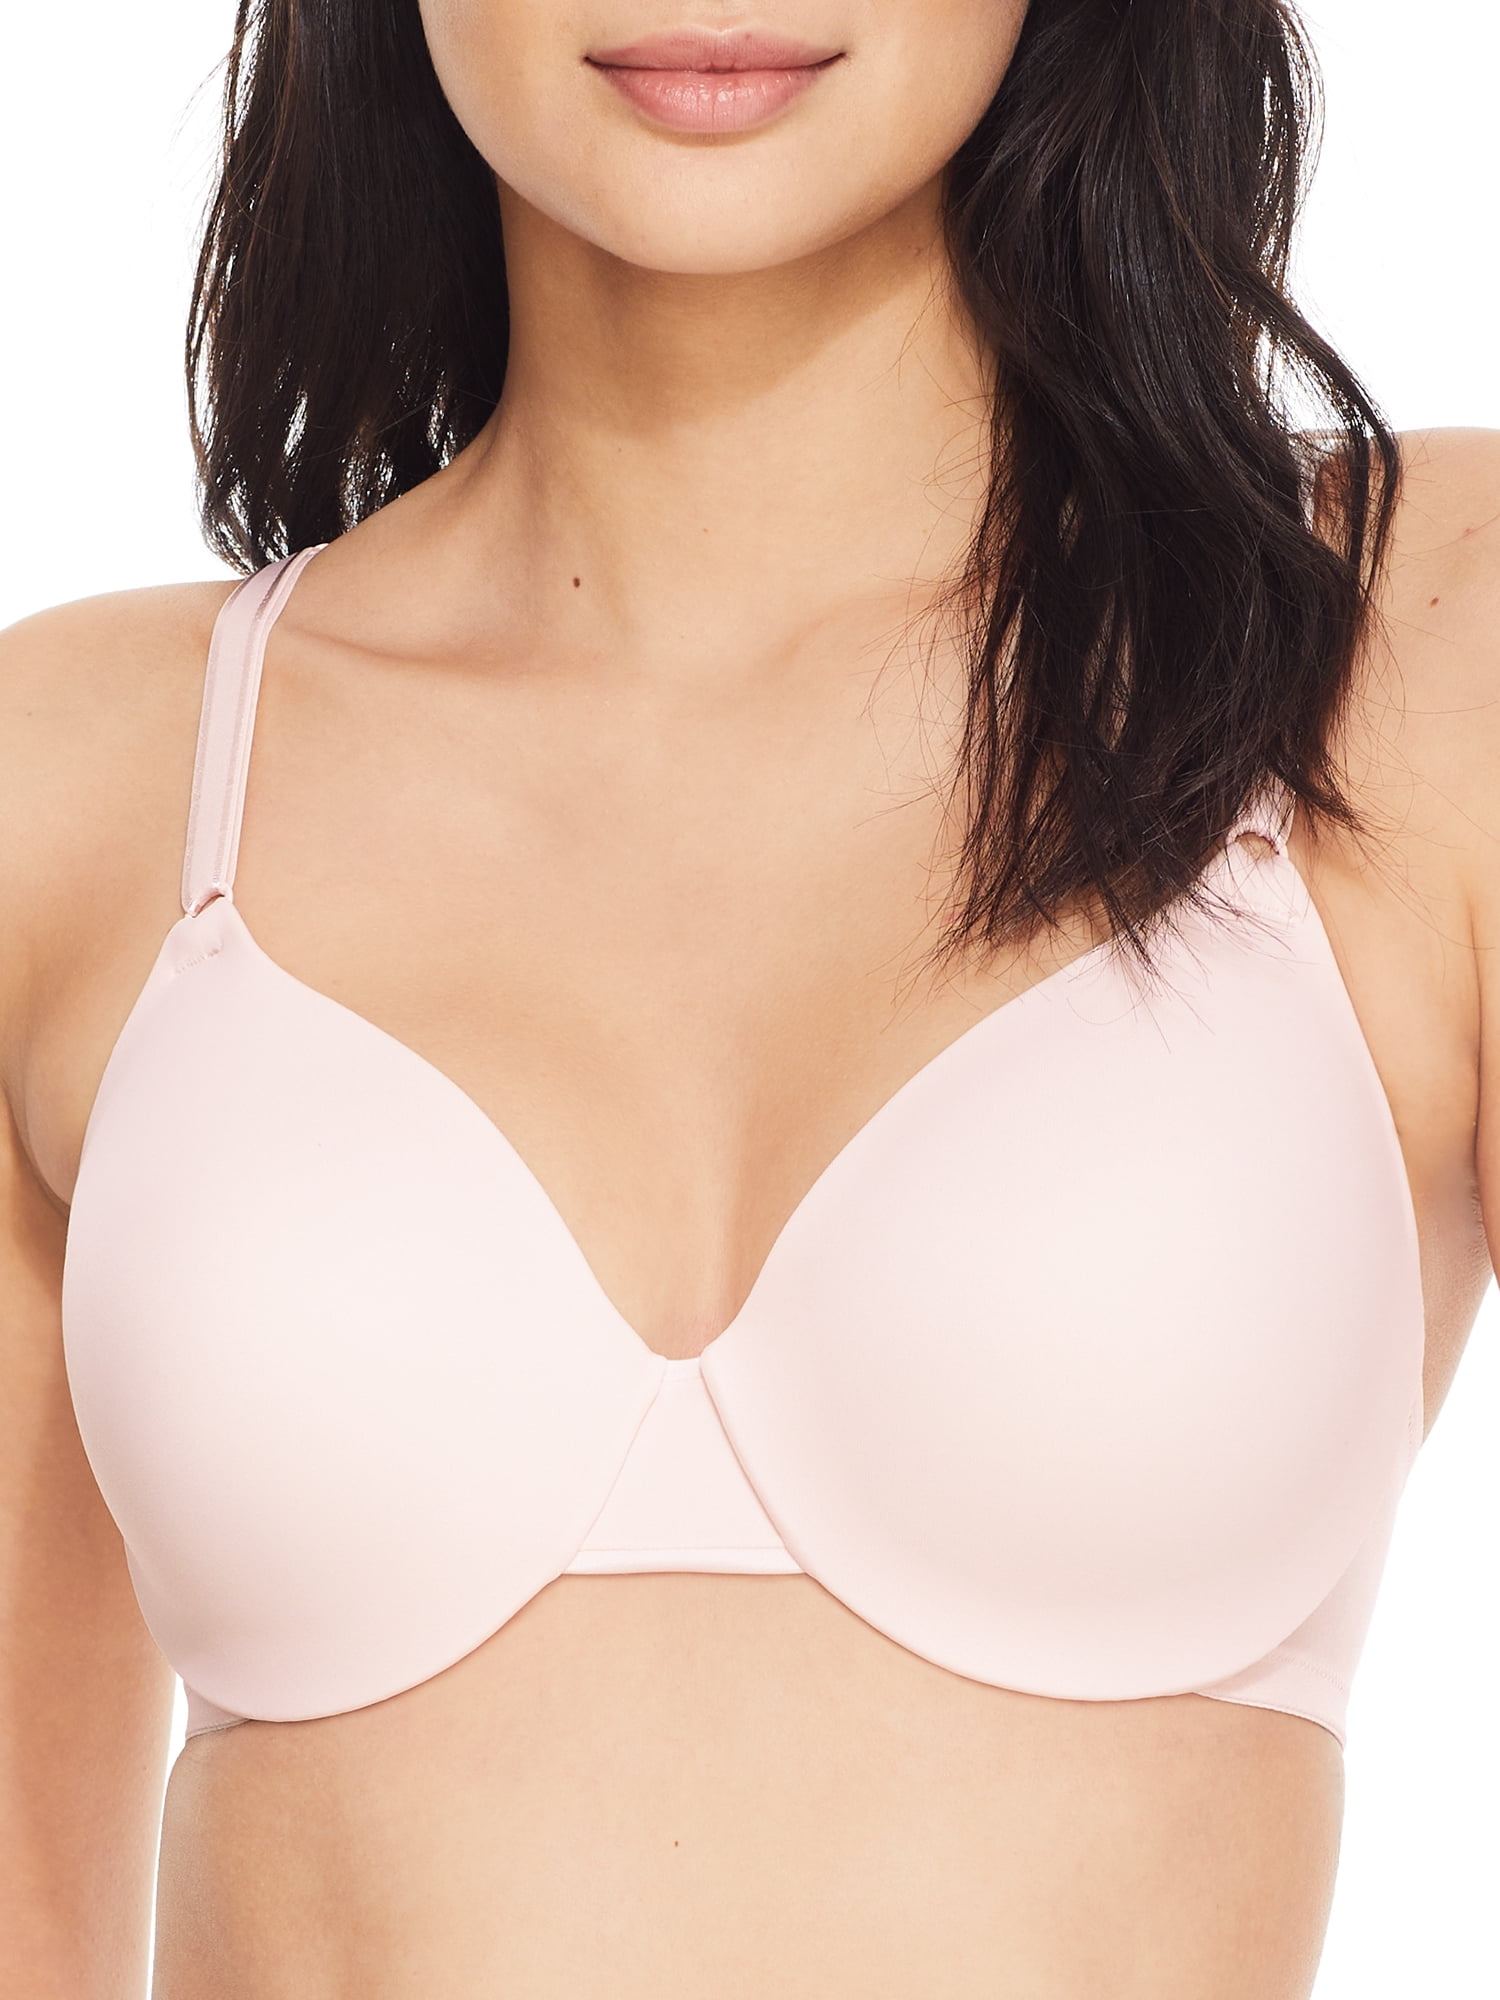 Simply Perfect by Warner's Women's Longline Convertible Wirefree Bra -  Berry 38DD